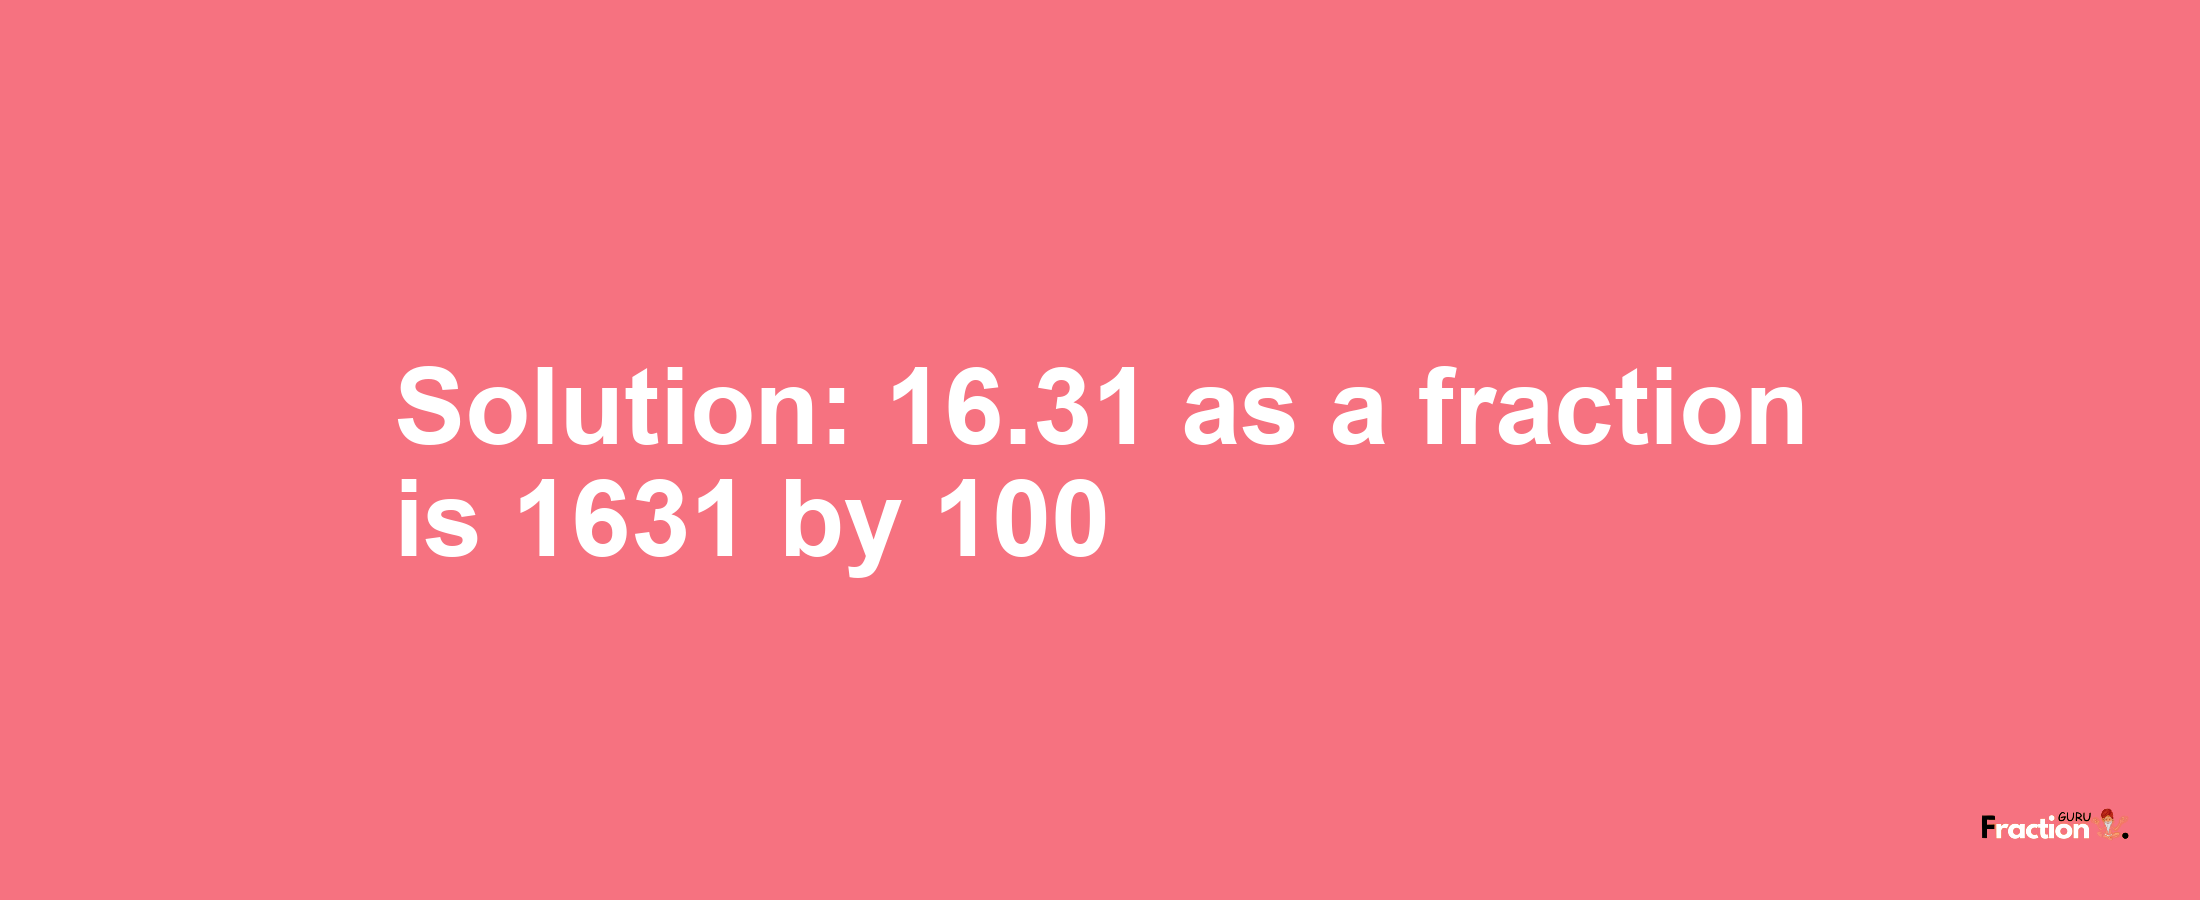 Solution:16.31 as a fraction is 1631/100